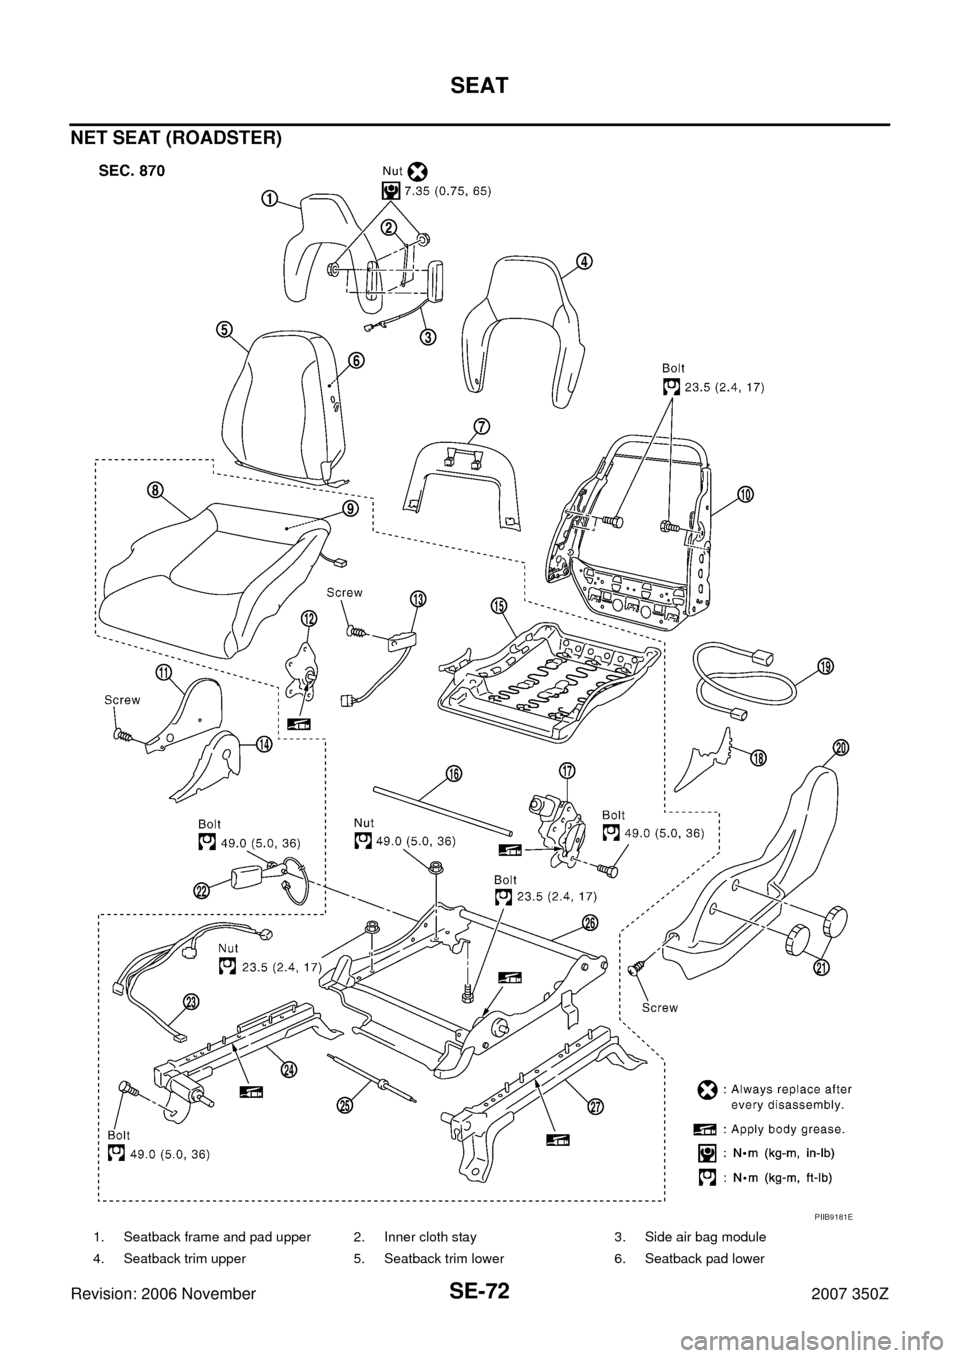 NISSAN 350Z 2007 Z33 Seat Manual PDF SE-72
SEAT
Revision: 2006 November2007 350Z
NET SEAT (ROADSTER)
1. Seatback frame and pad upper 2. Inner cloth stay 3. Side air bag module
4. Seatback trim upper 5. Seatback trim lower 6. Seatback pad